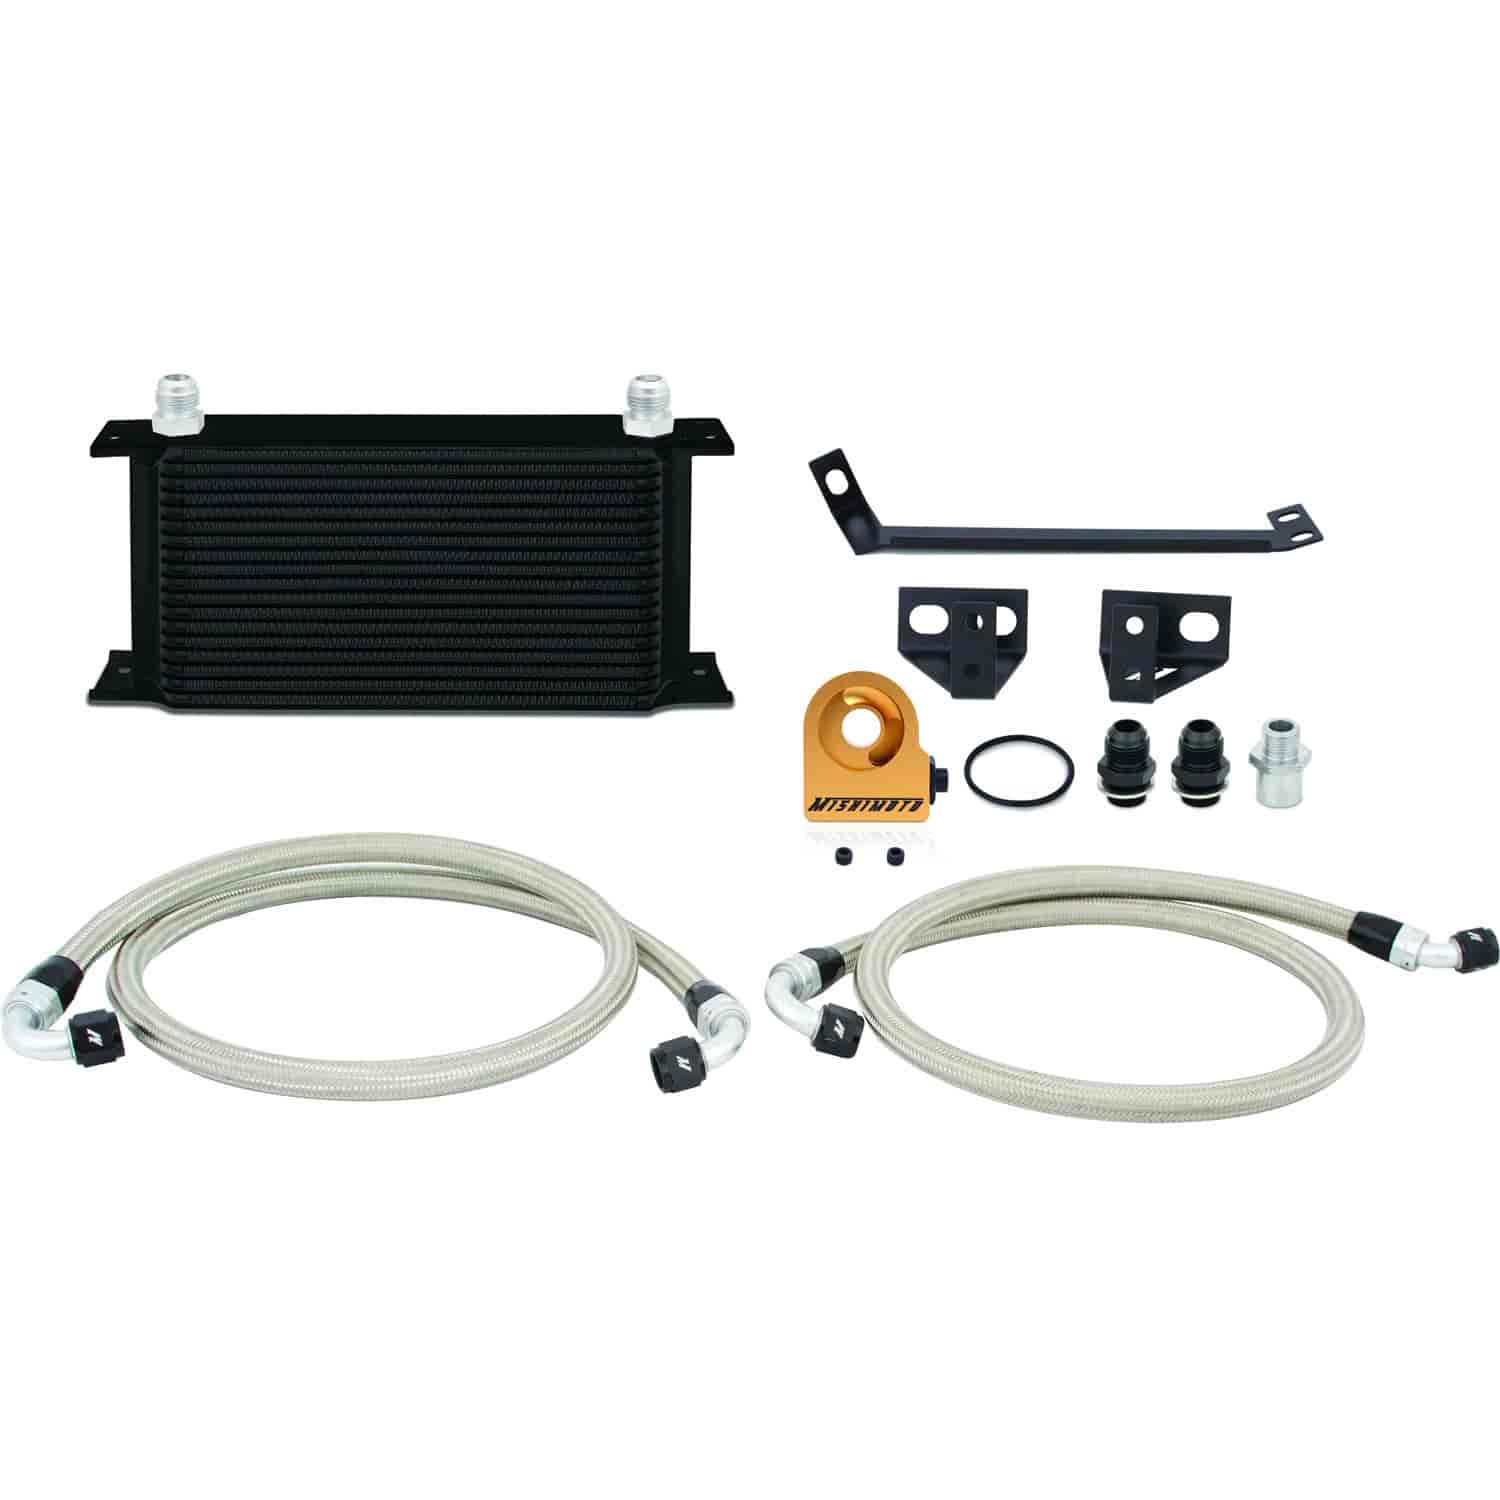 Ford Mustang EcoBoost Thermostatic Oil Cooler Kit - MFG Part No. MMOC-MUS4-15TBK